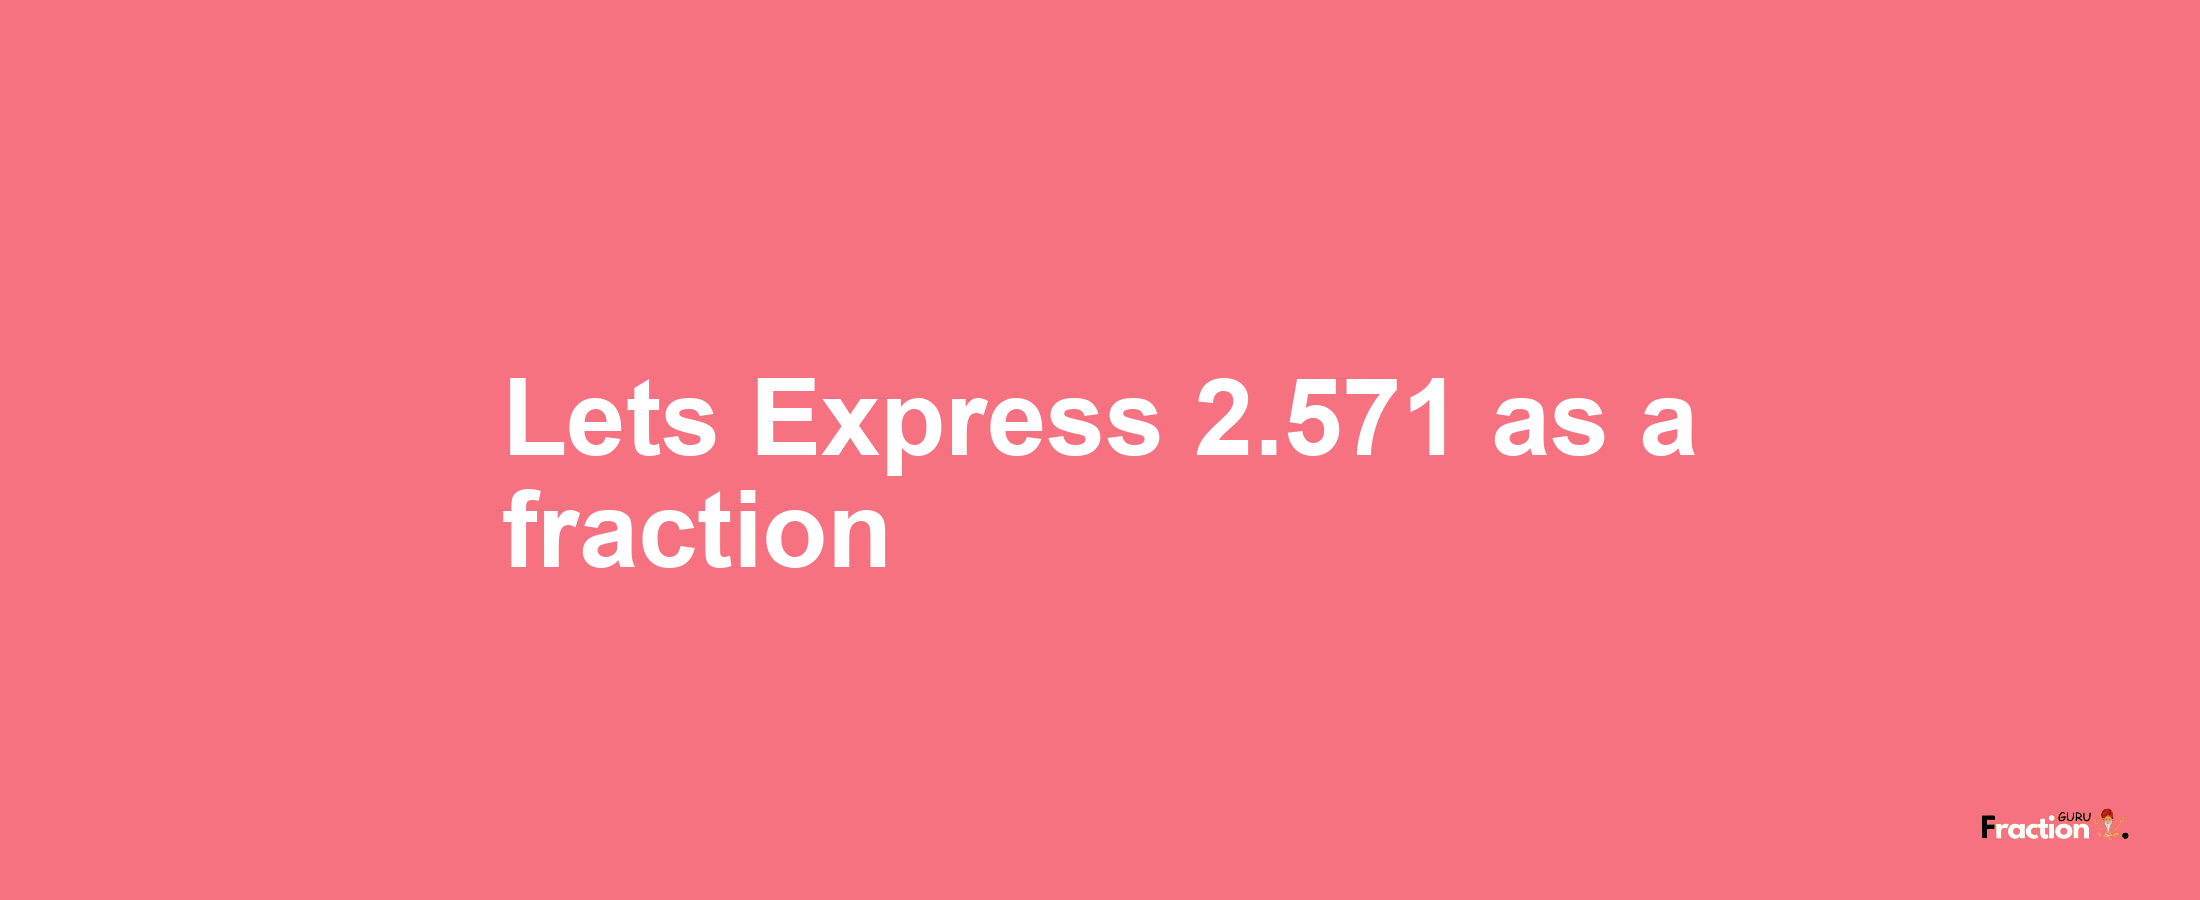 Lets Express 2.571 as afraction